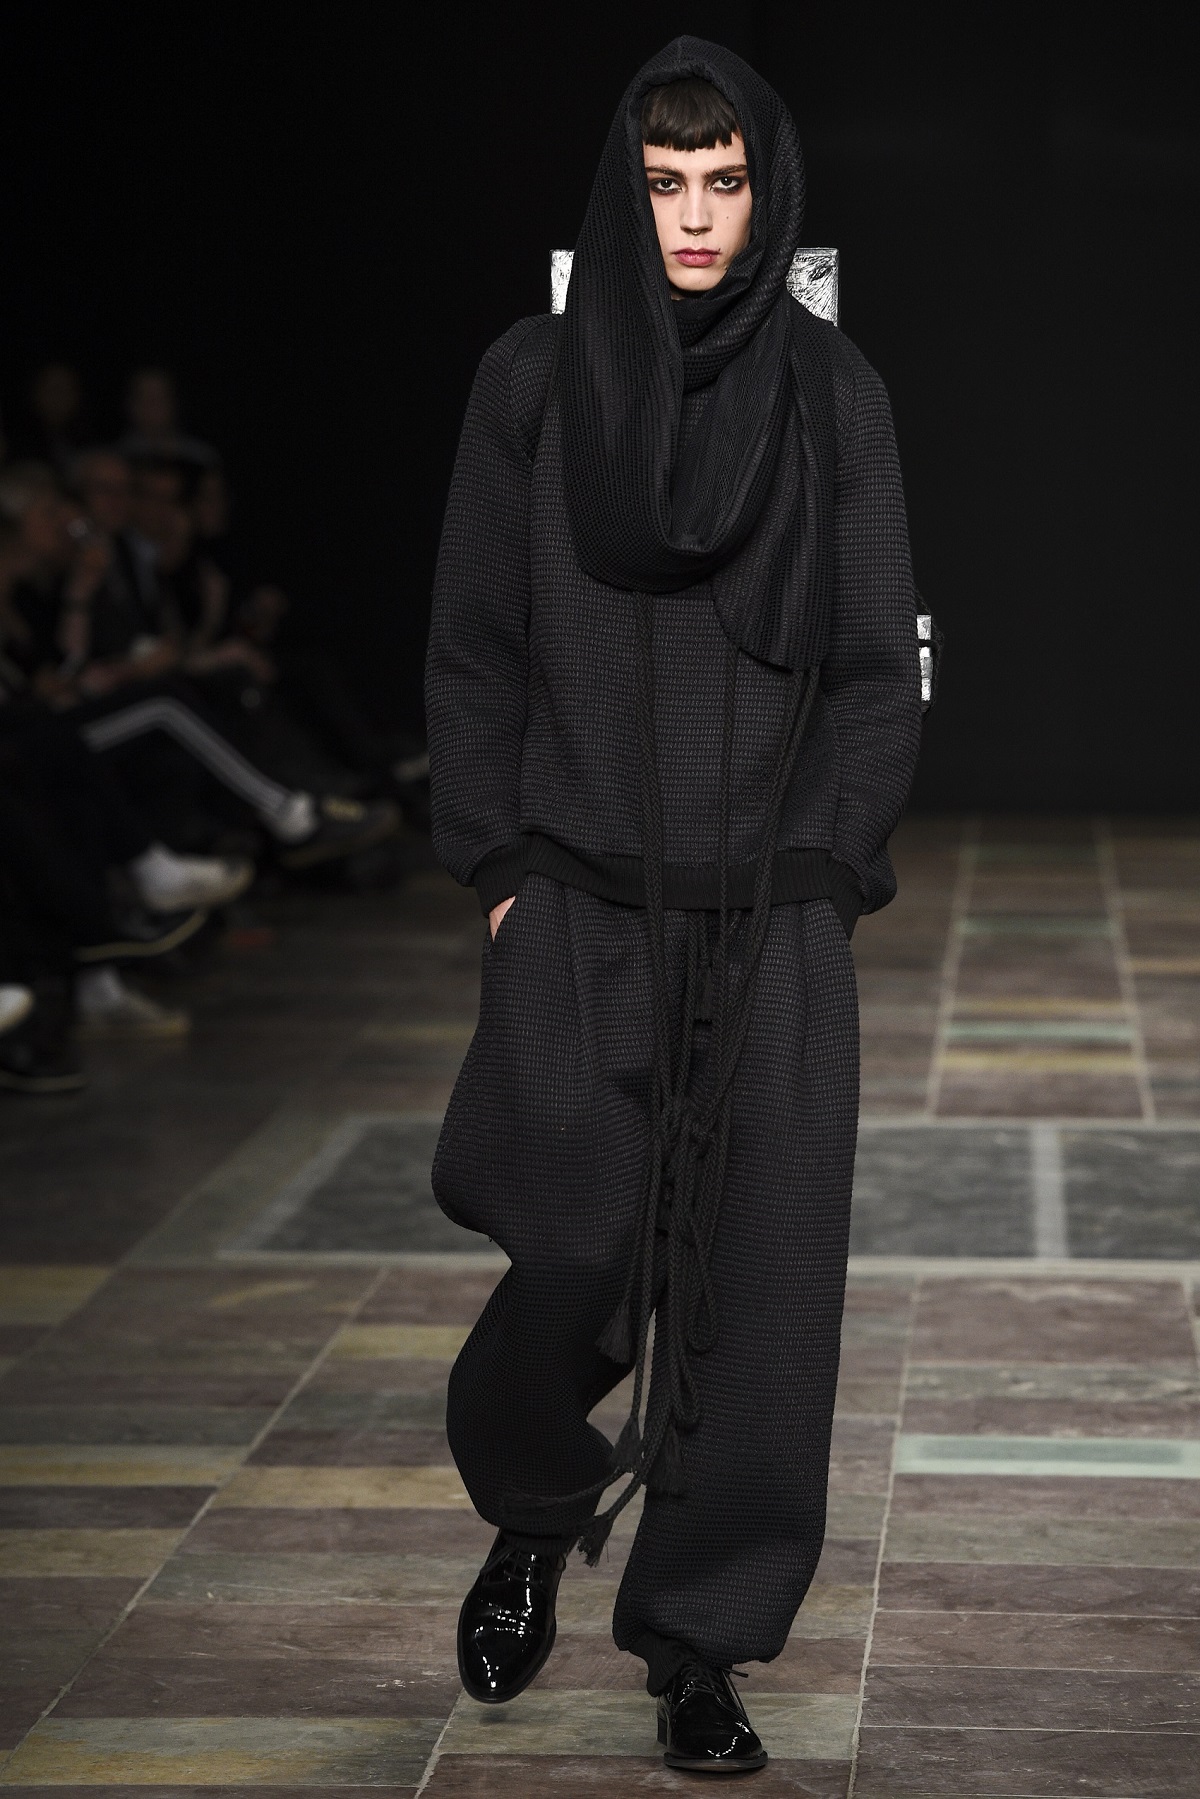 You are currently viewing Nicholas Nybro AW16 – SQ2